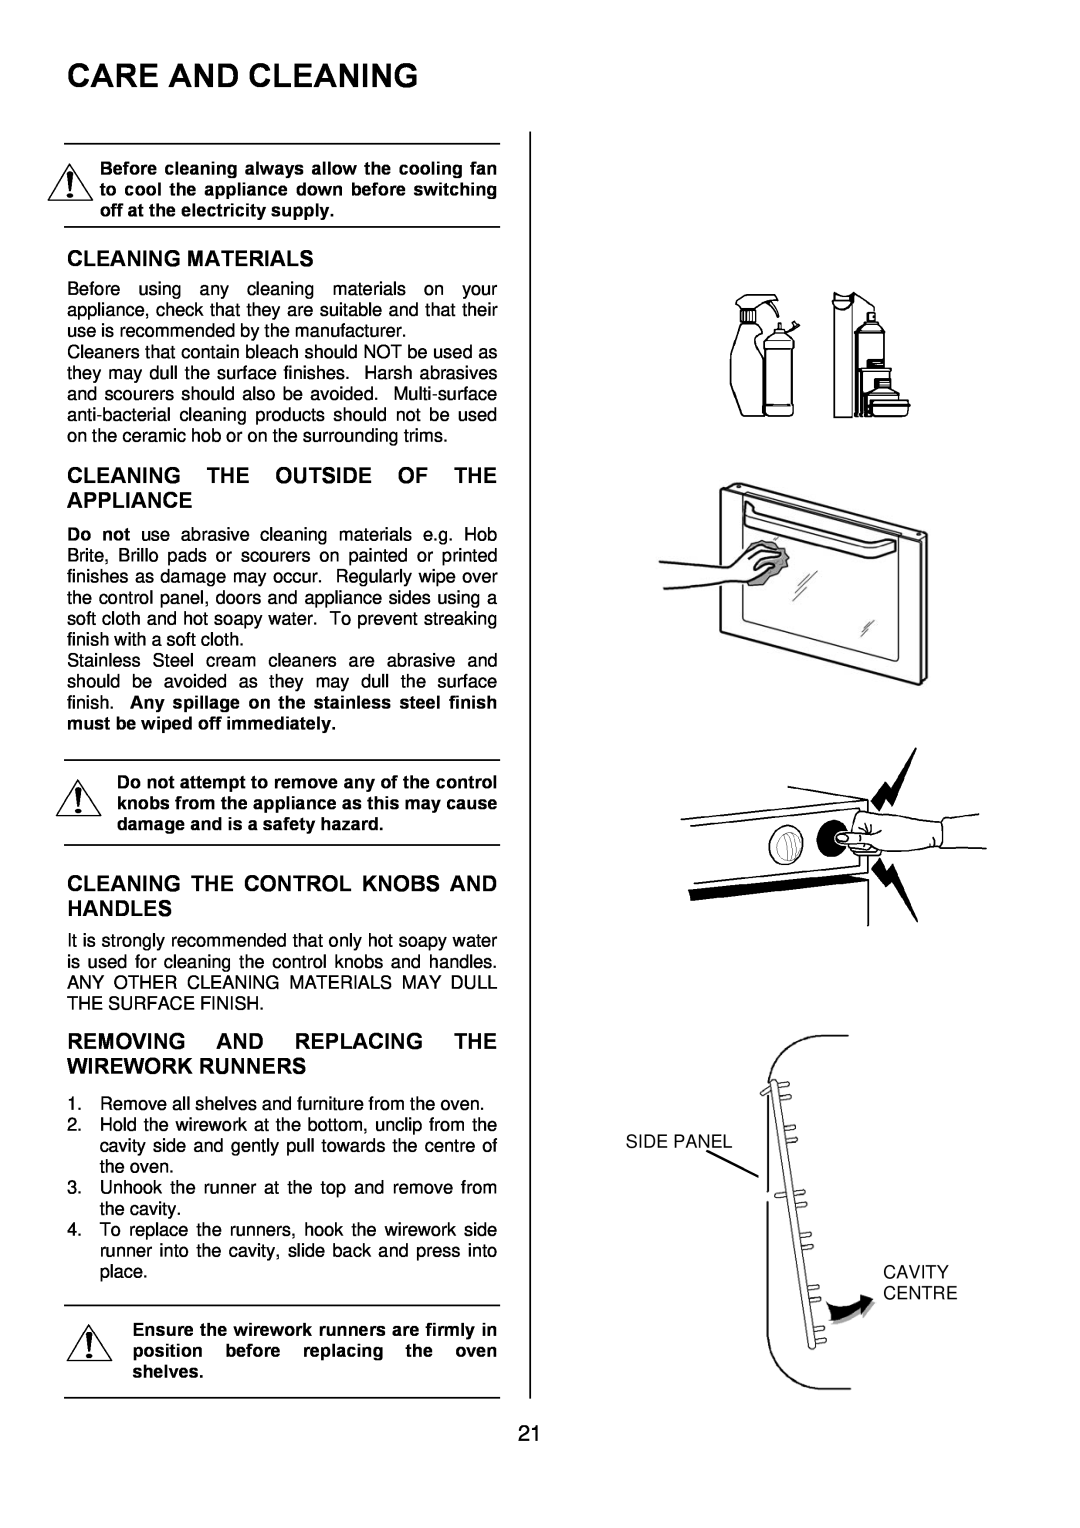 Electrolux EKC6044, EKC6045 manual Care And Cleaning, Cleaning Materials, Cleaning The Outside Of The Appliance 